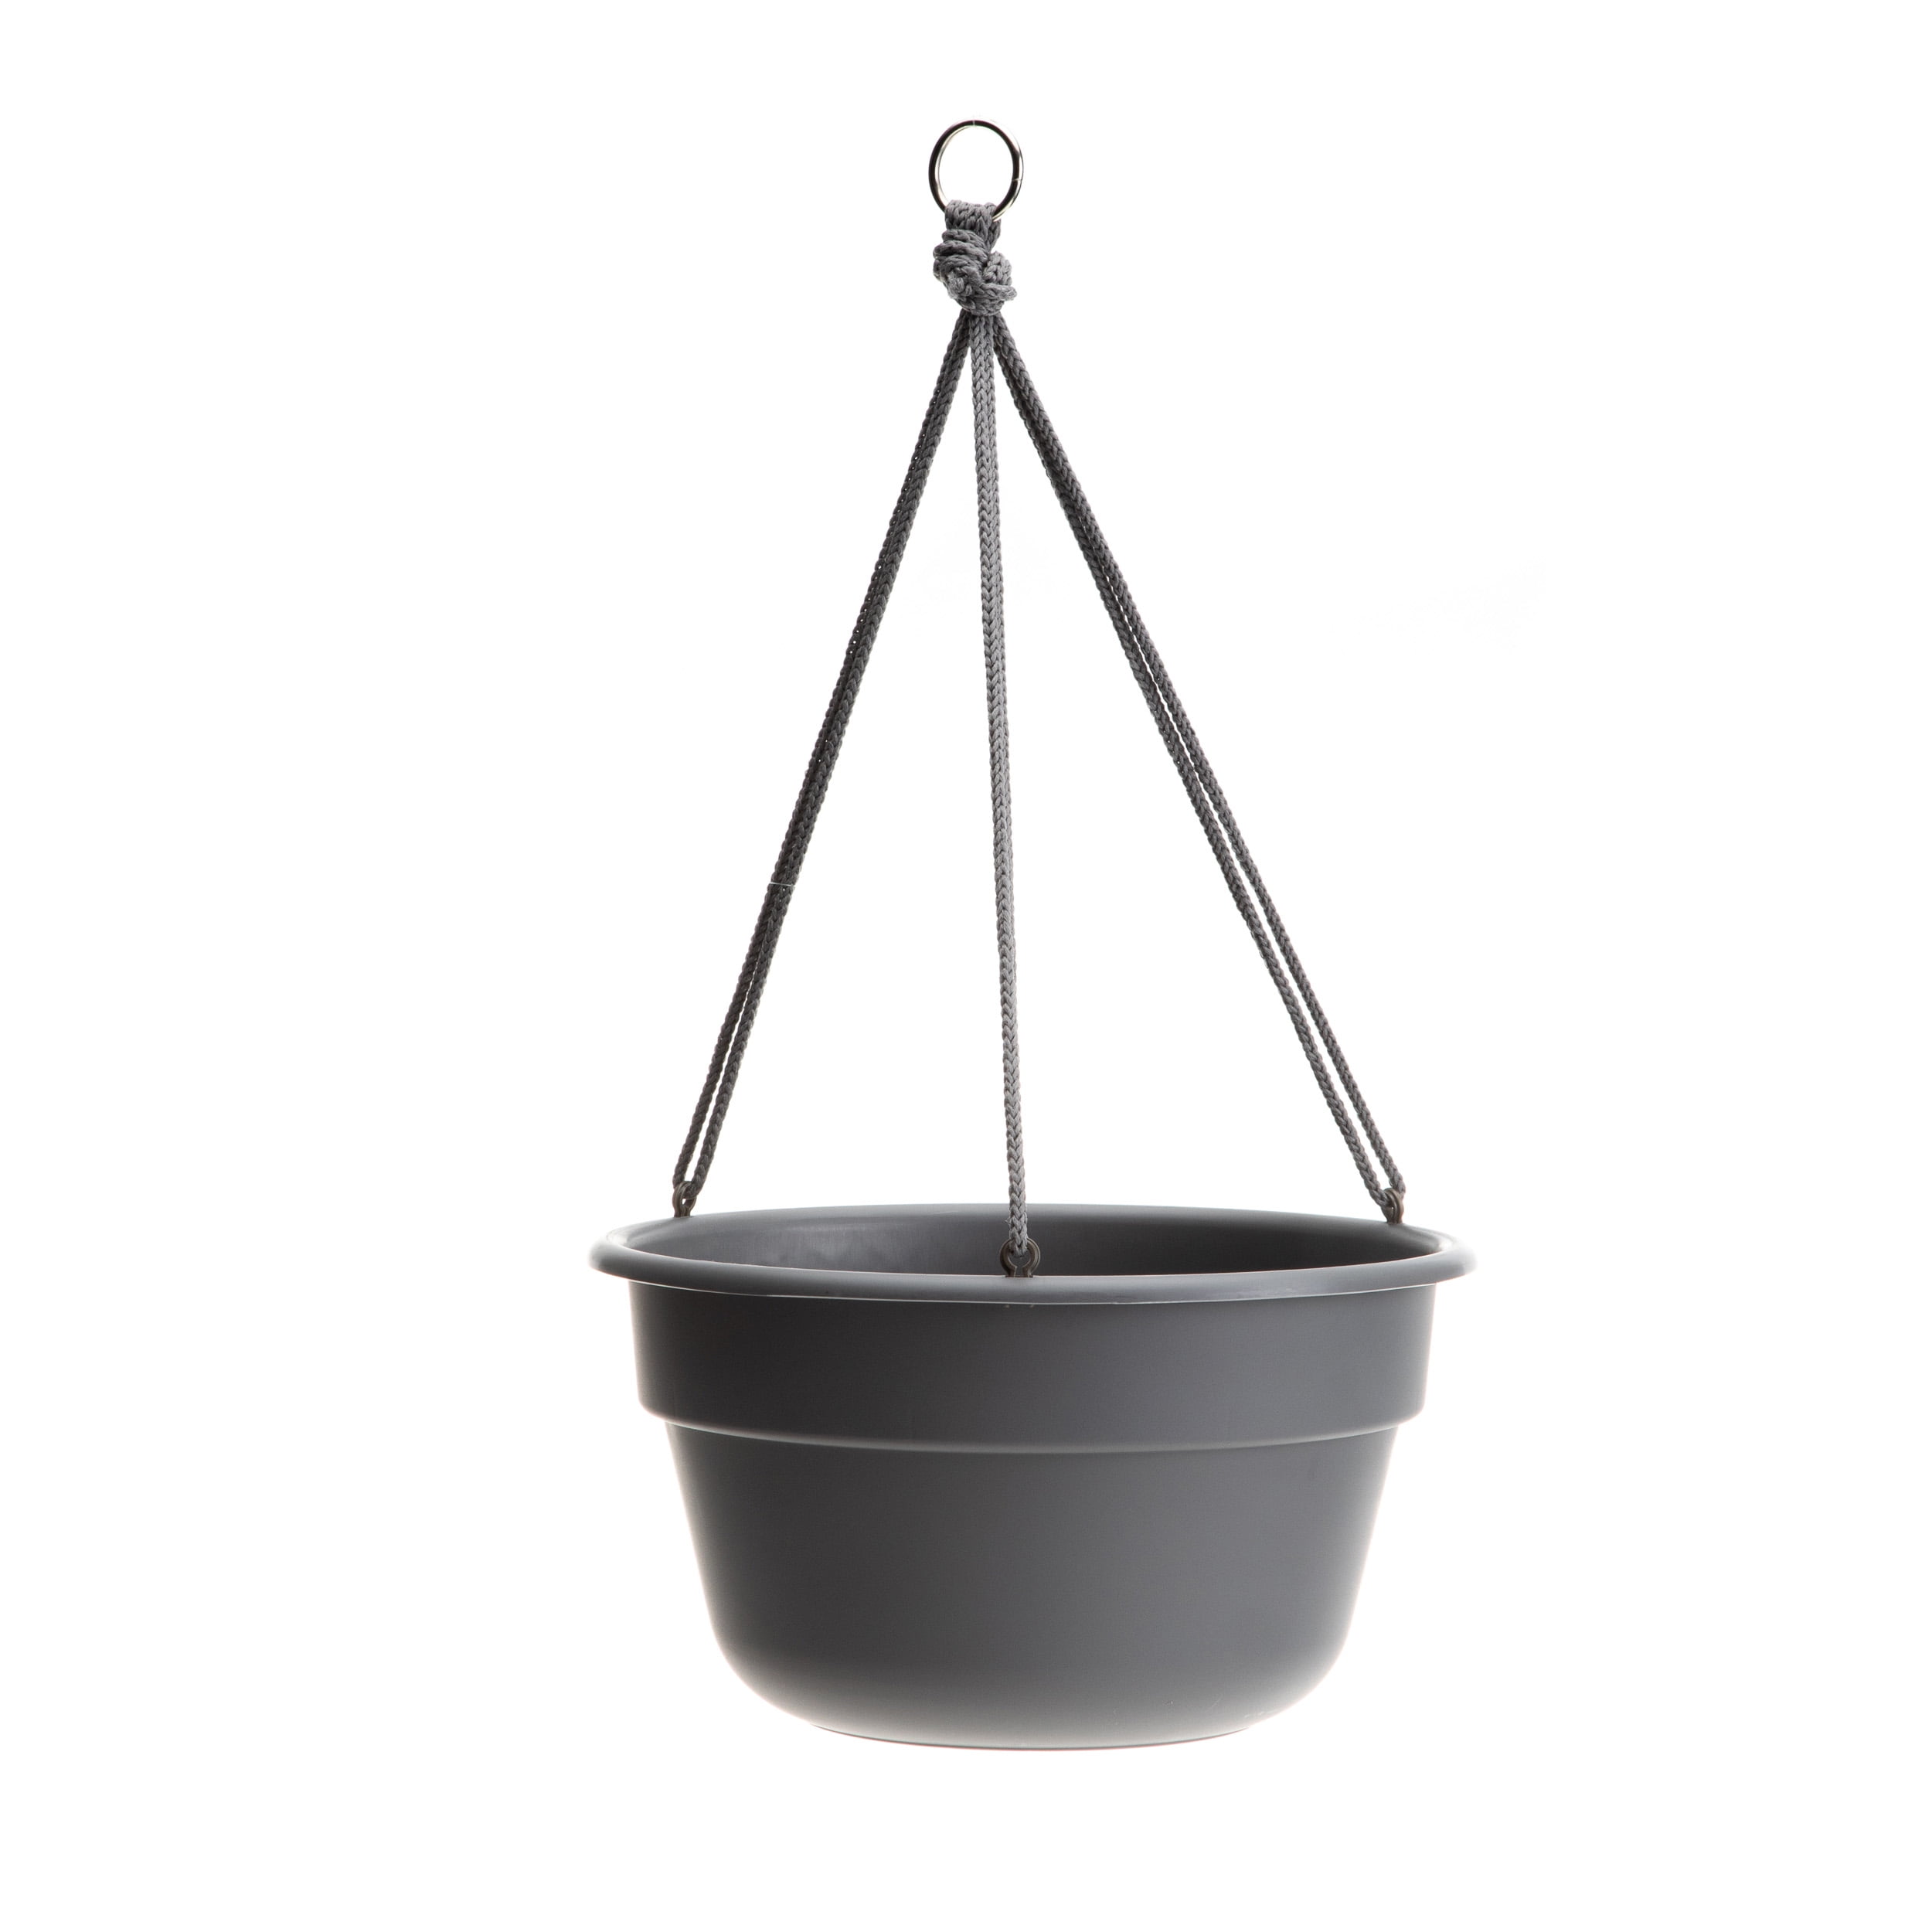 Dchb12-908 12 In. Dura Cotta Self Watering Hanging Basket Planter, Charcoal